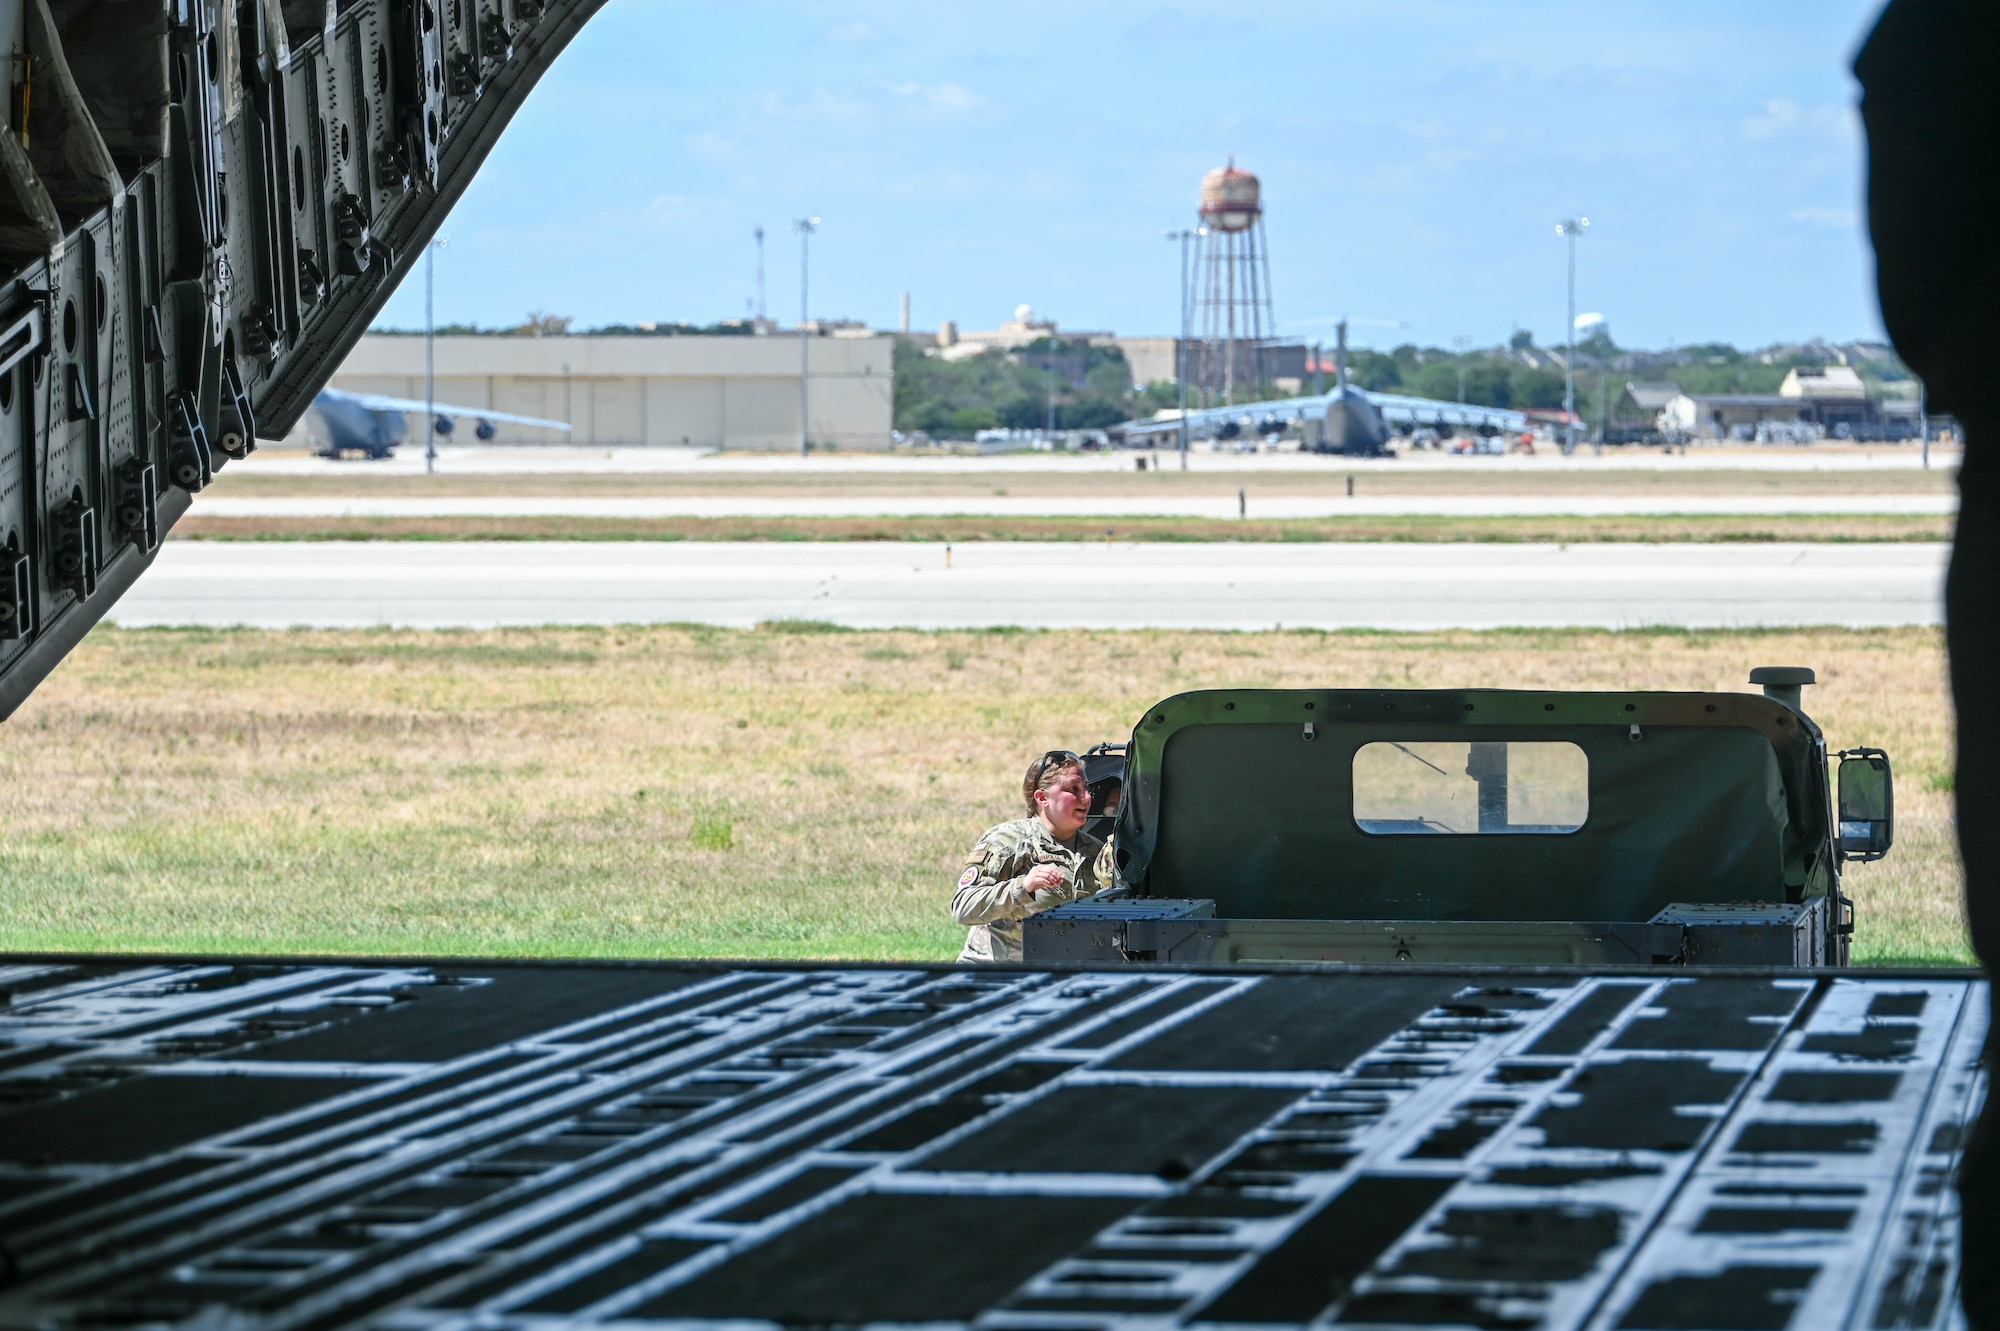 U.S. Air Force Staff Sgt. Jackie Mermolia, 58th Airlift Squadron loadmaster instructor, assists with a vehicle download from a C-17 Globemaster III at the Torch Athena Fly-In in San Antonio, Texas, Sept. 21, 2023. The fly-in event focused on empowerment through engagement and increasing diversity in aviation career trajectories. (U.S. Air Force photo by Airman 1st Class Heidi Bucins)